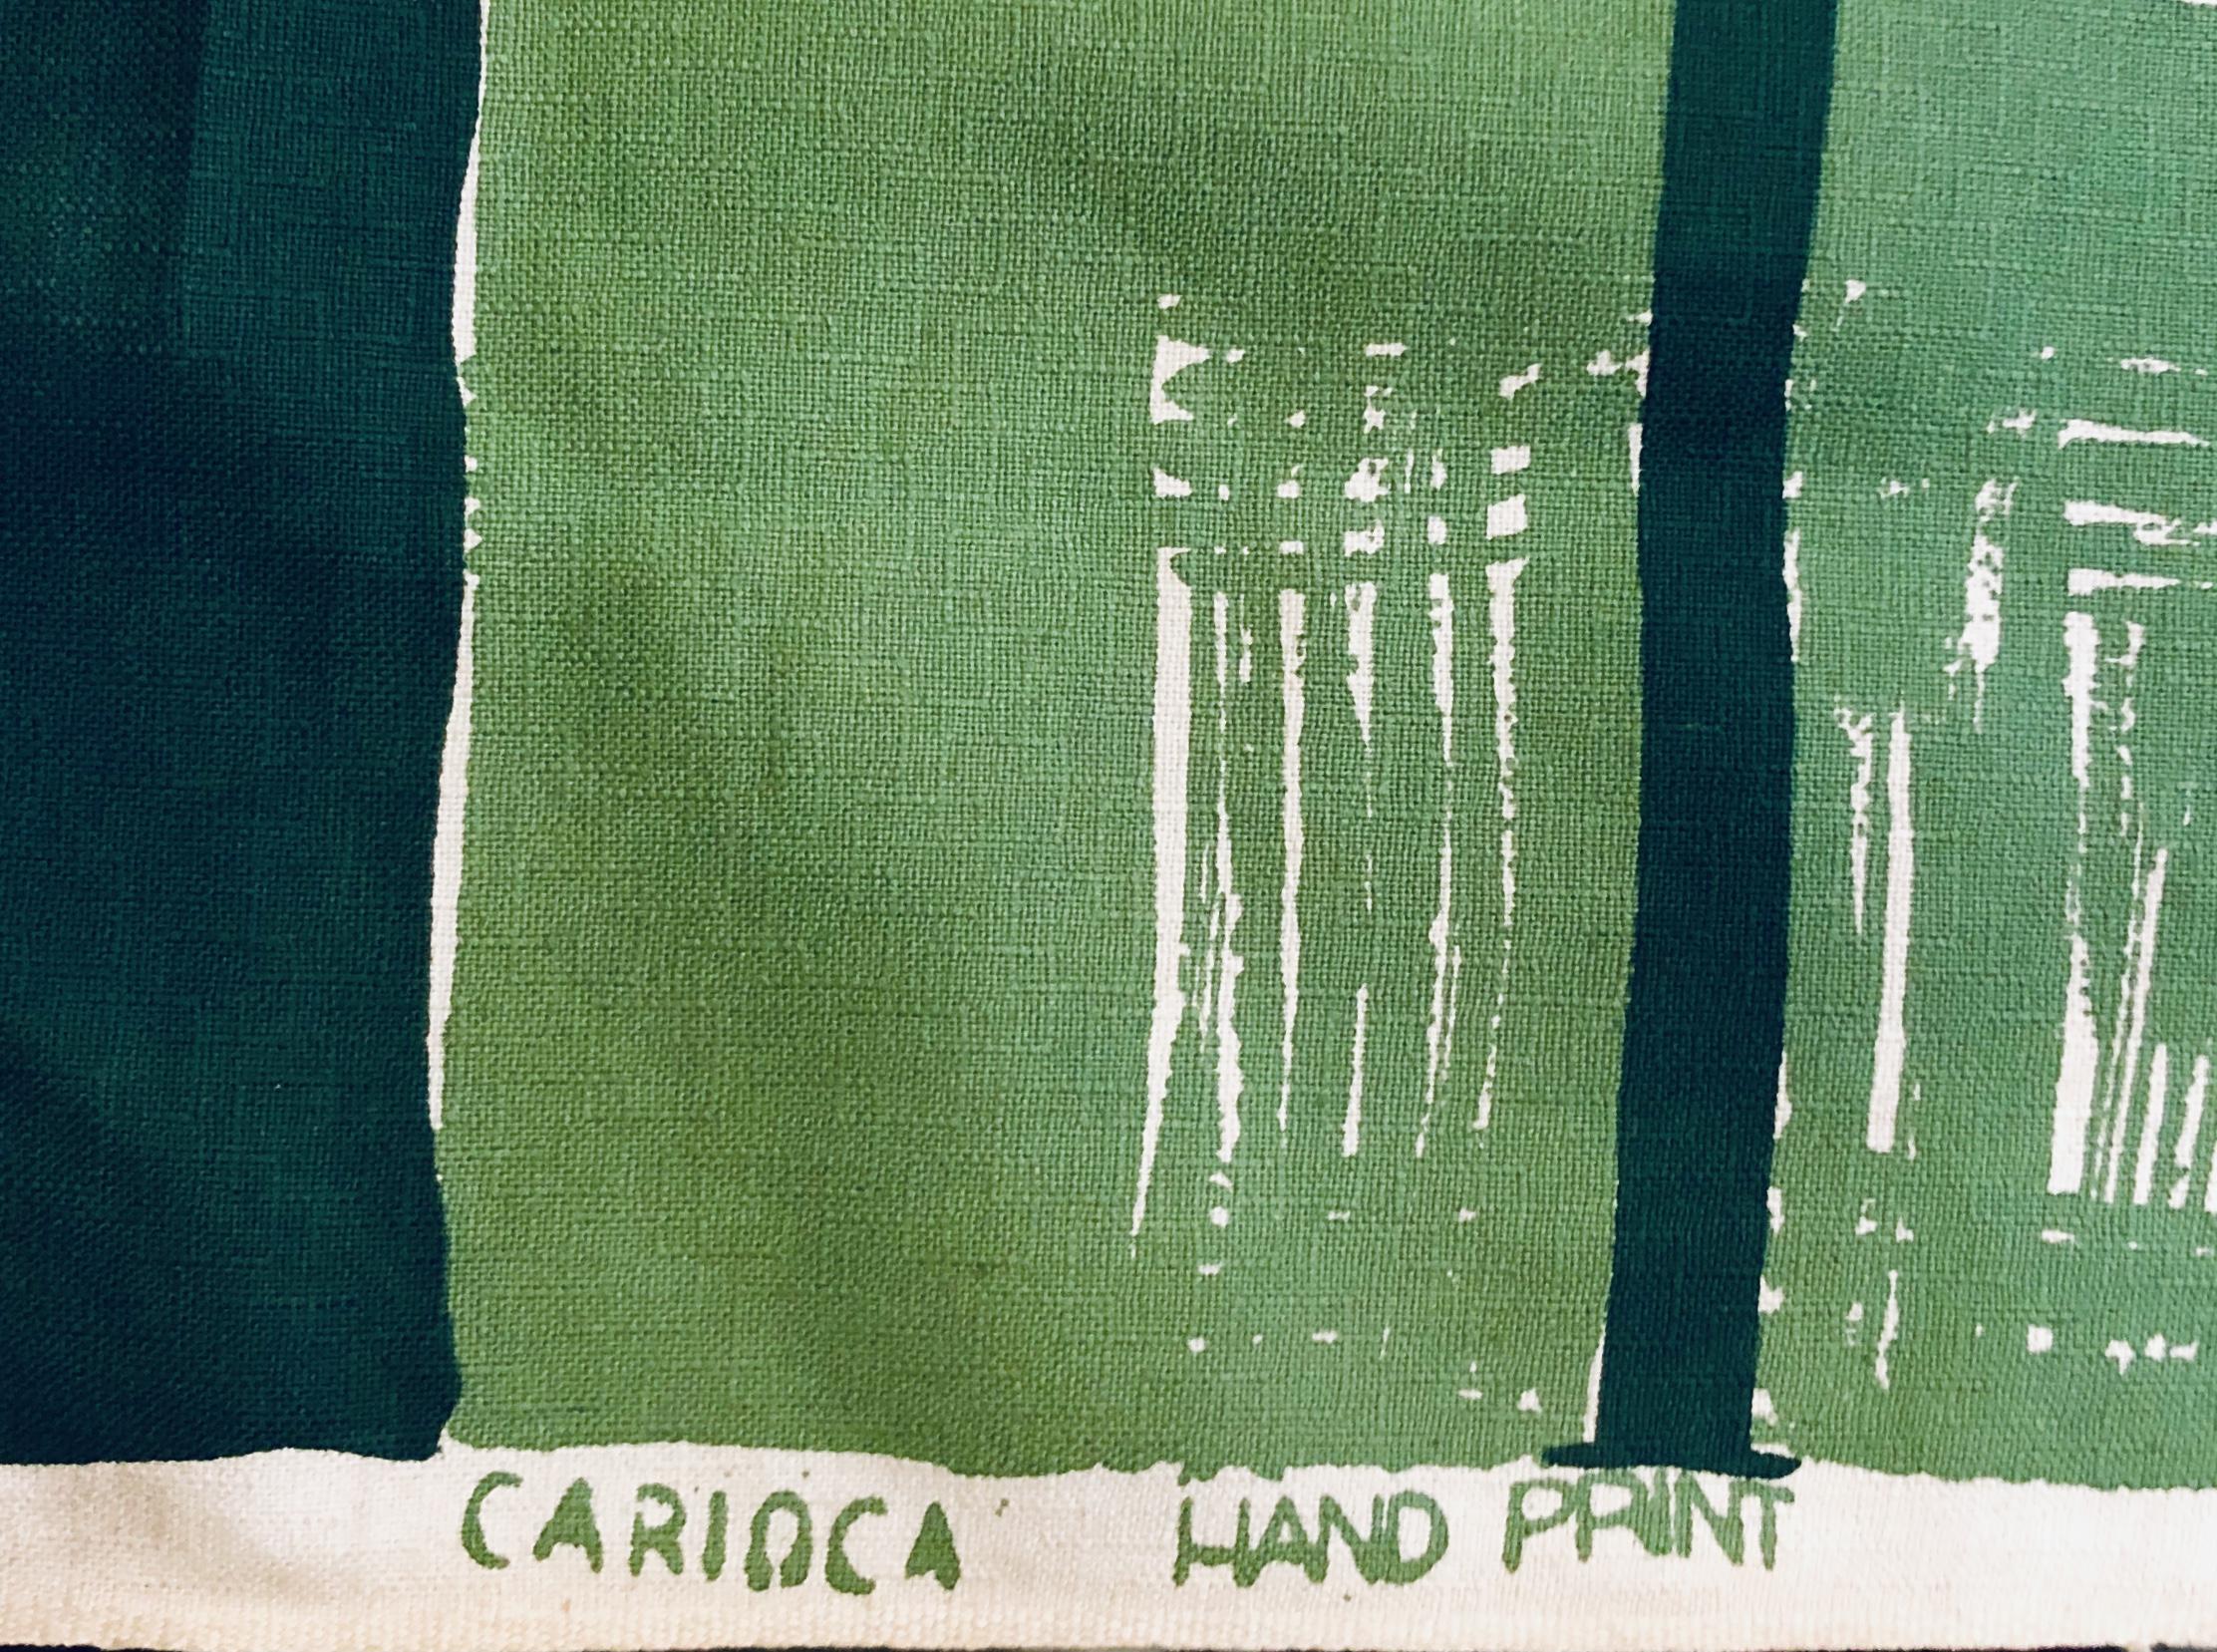 This beautiful vintage fabric is a 100% cotton barkcloth. Barkcloth is a textured printed woven fabric. This fabric was made by Carioca and is white with two shades of green in an abstract, Mid-Century, brushstroke style plaid print.

This fabric